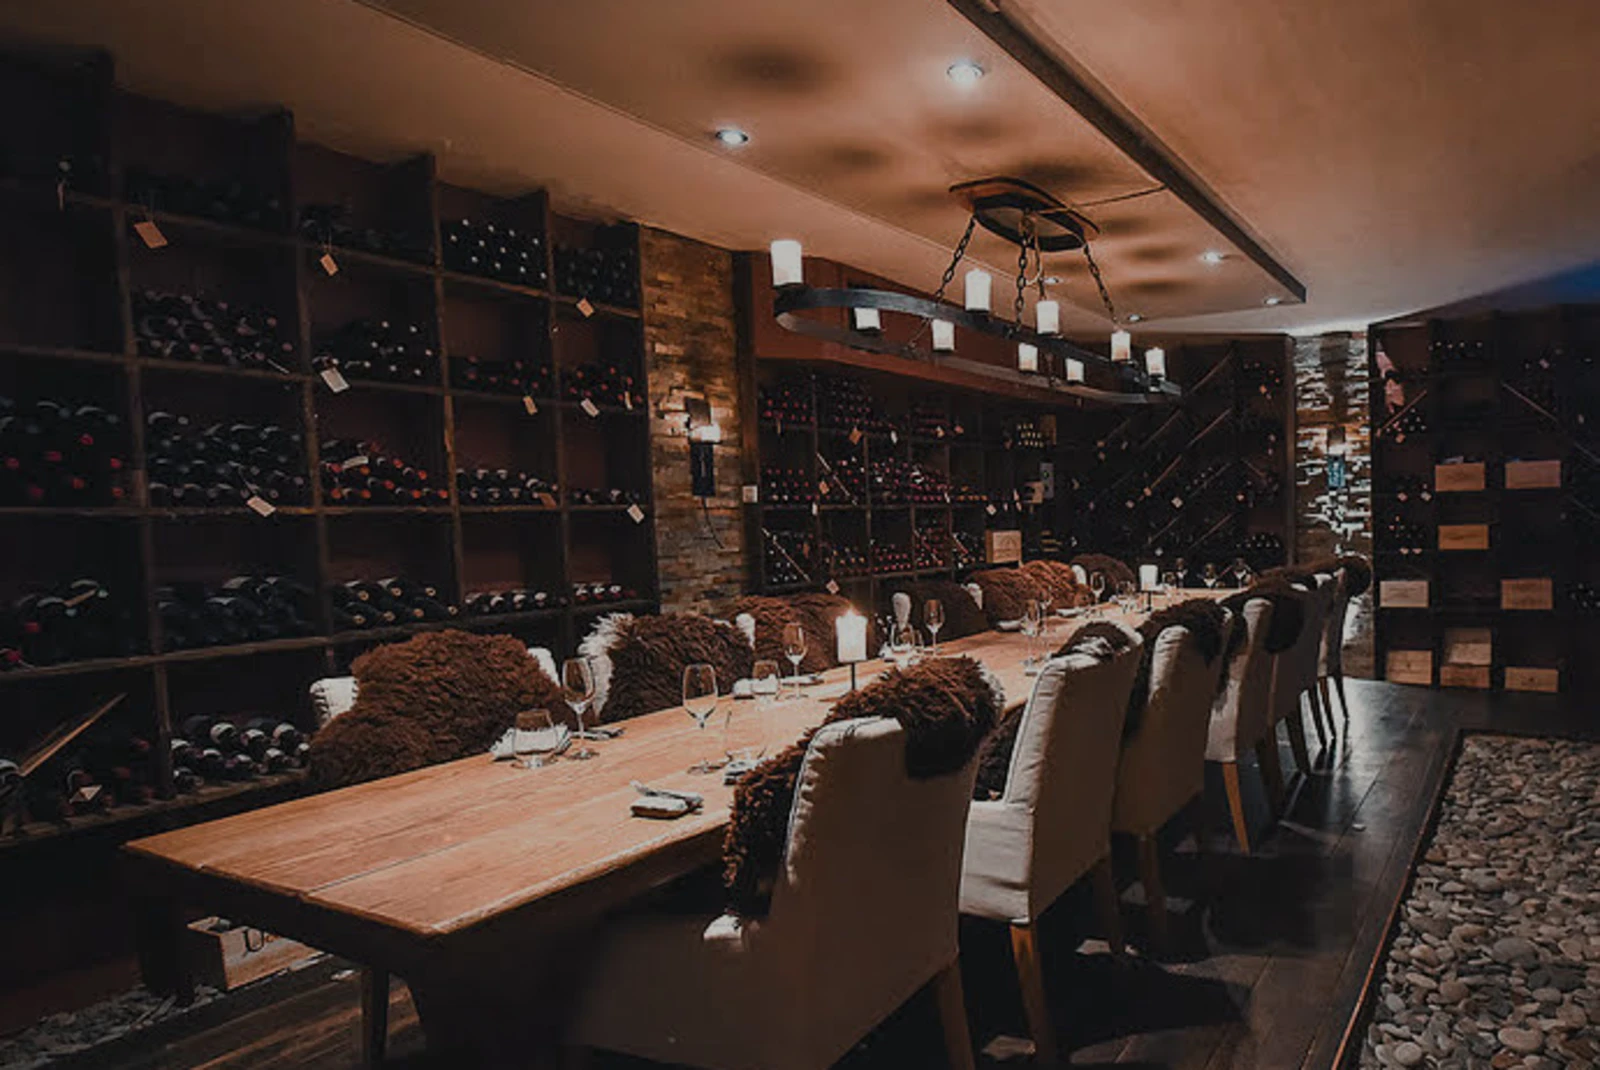 Wood table with chairs and wine bottles in a dimly lit room